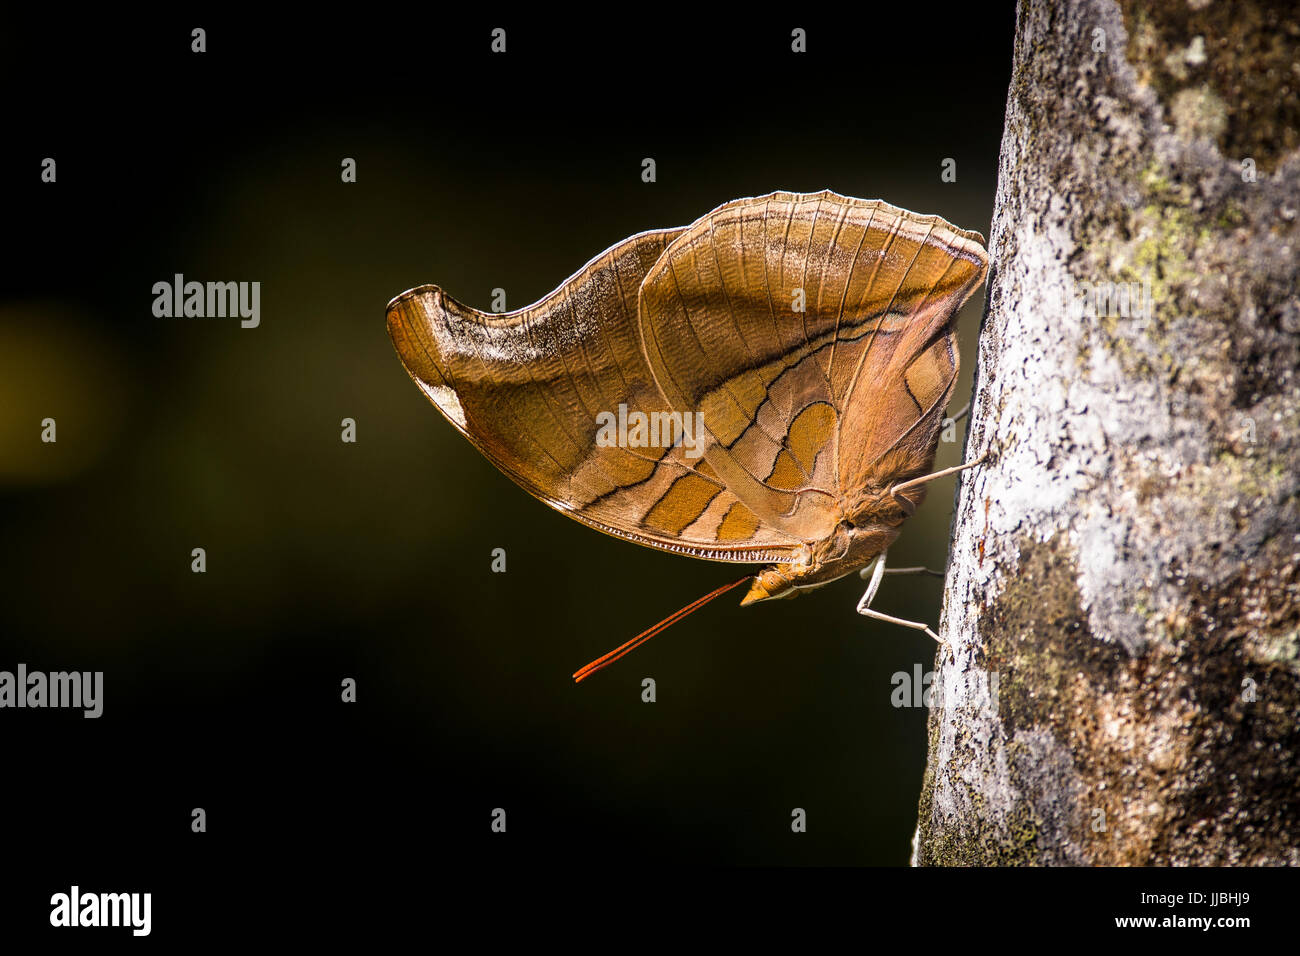 Historis odius - Stinky Leafwing butterfly on a tree with dark background image taken in Panama Stock Photo